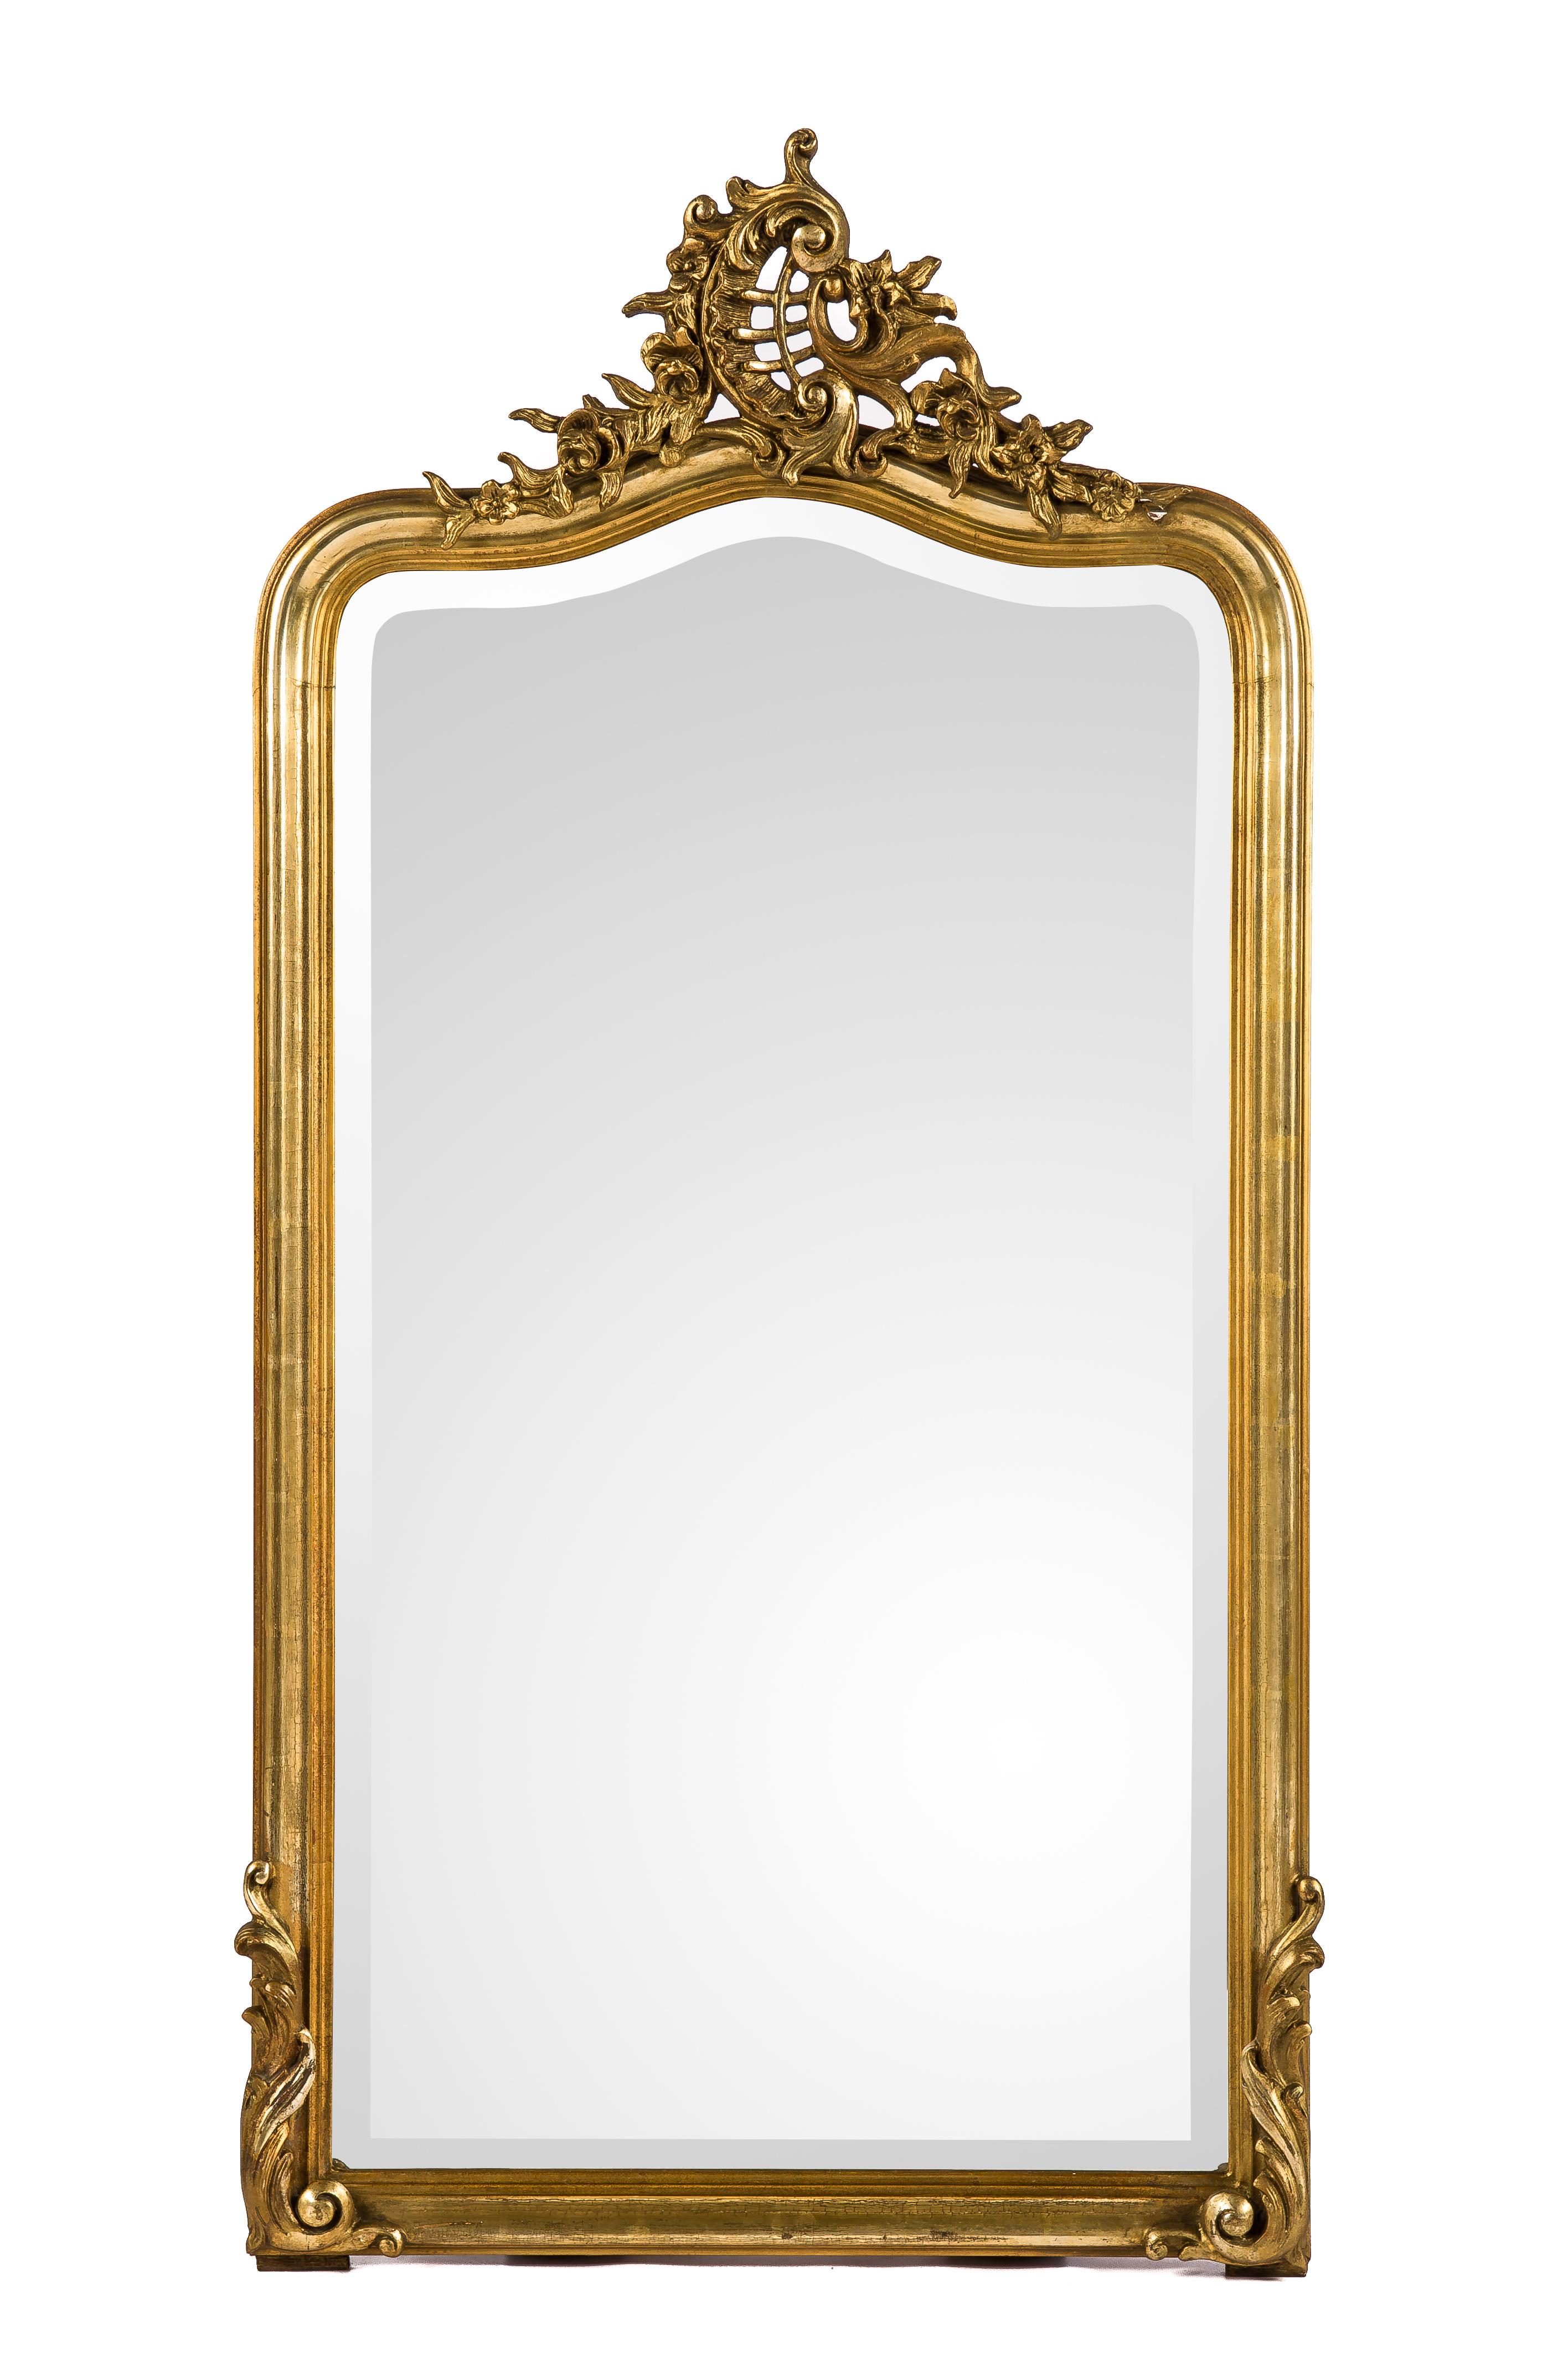 Antique 19th century French Louis Quinze Gold Gilt Mirror with Facetted Glass For Sale 3